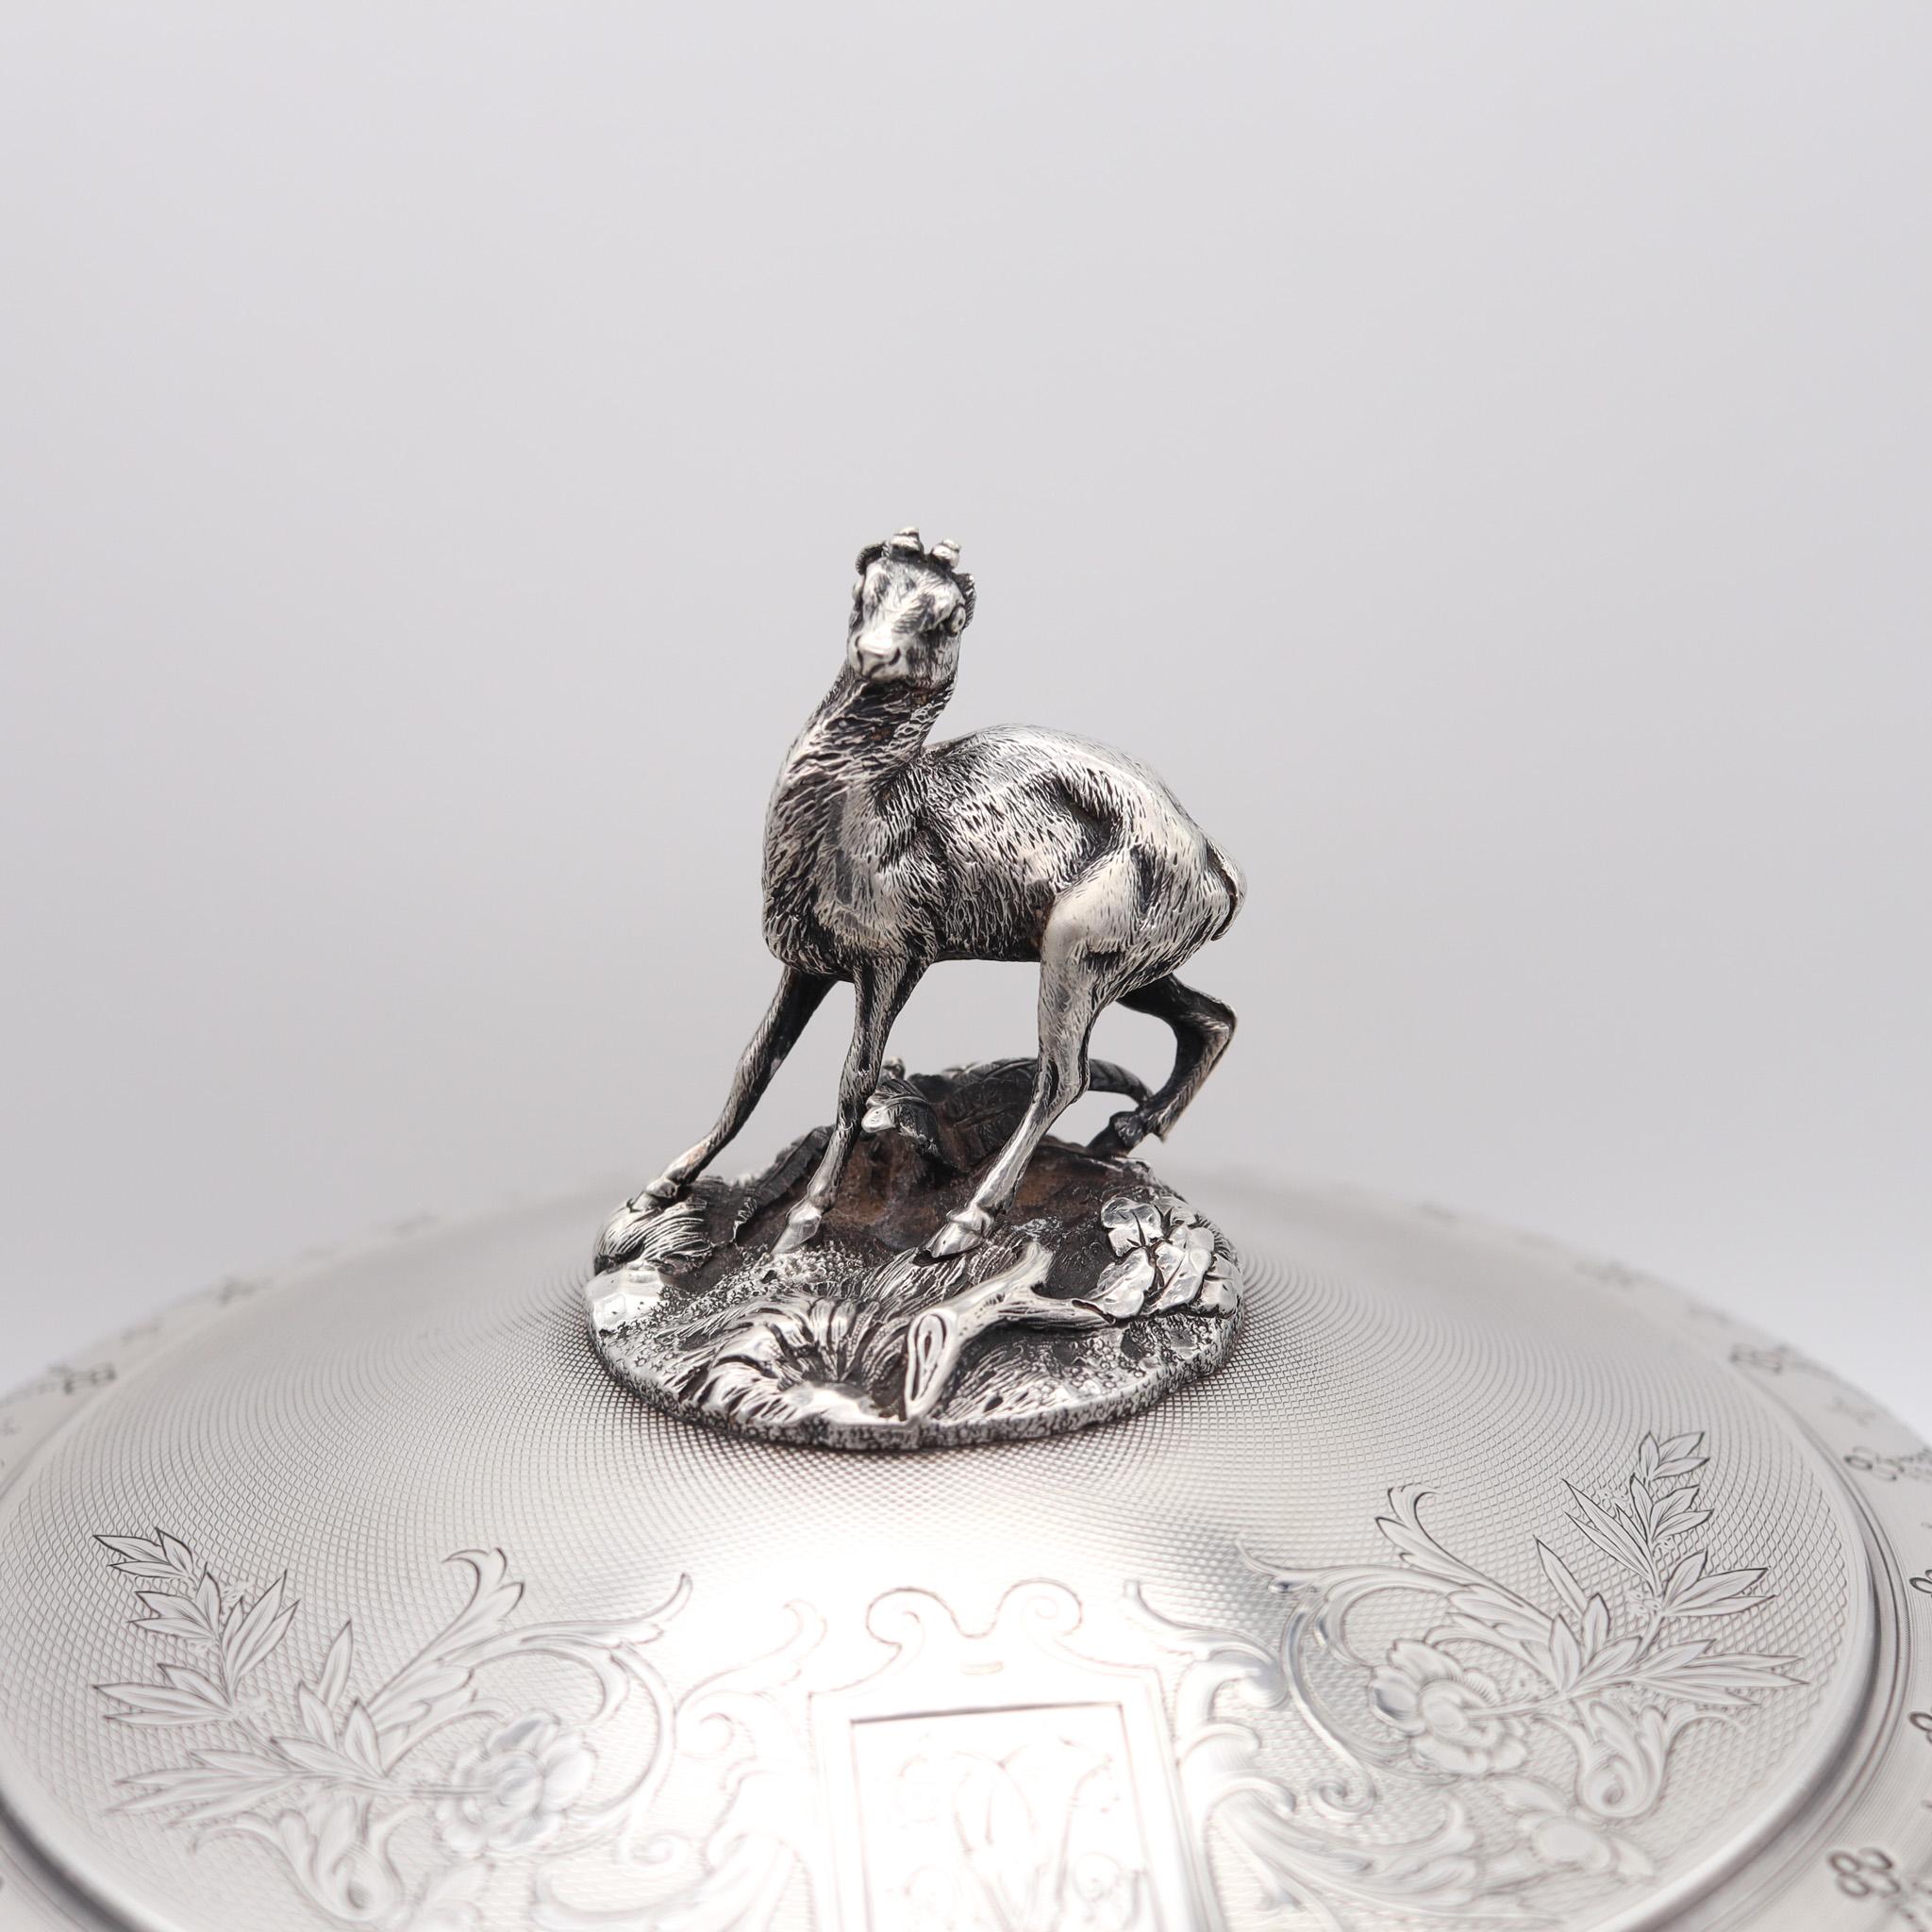 Tallois & Mayence 1885 Paris Covered Dish With Plate In .950 Sterling Silver For Sale 1